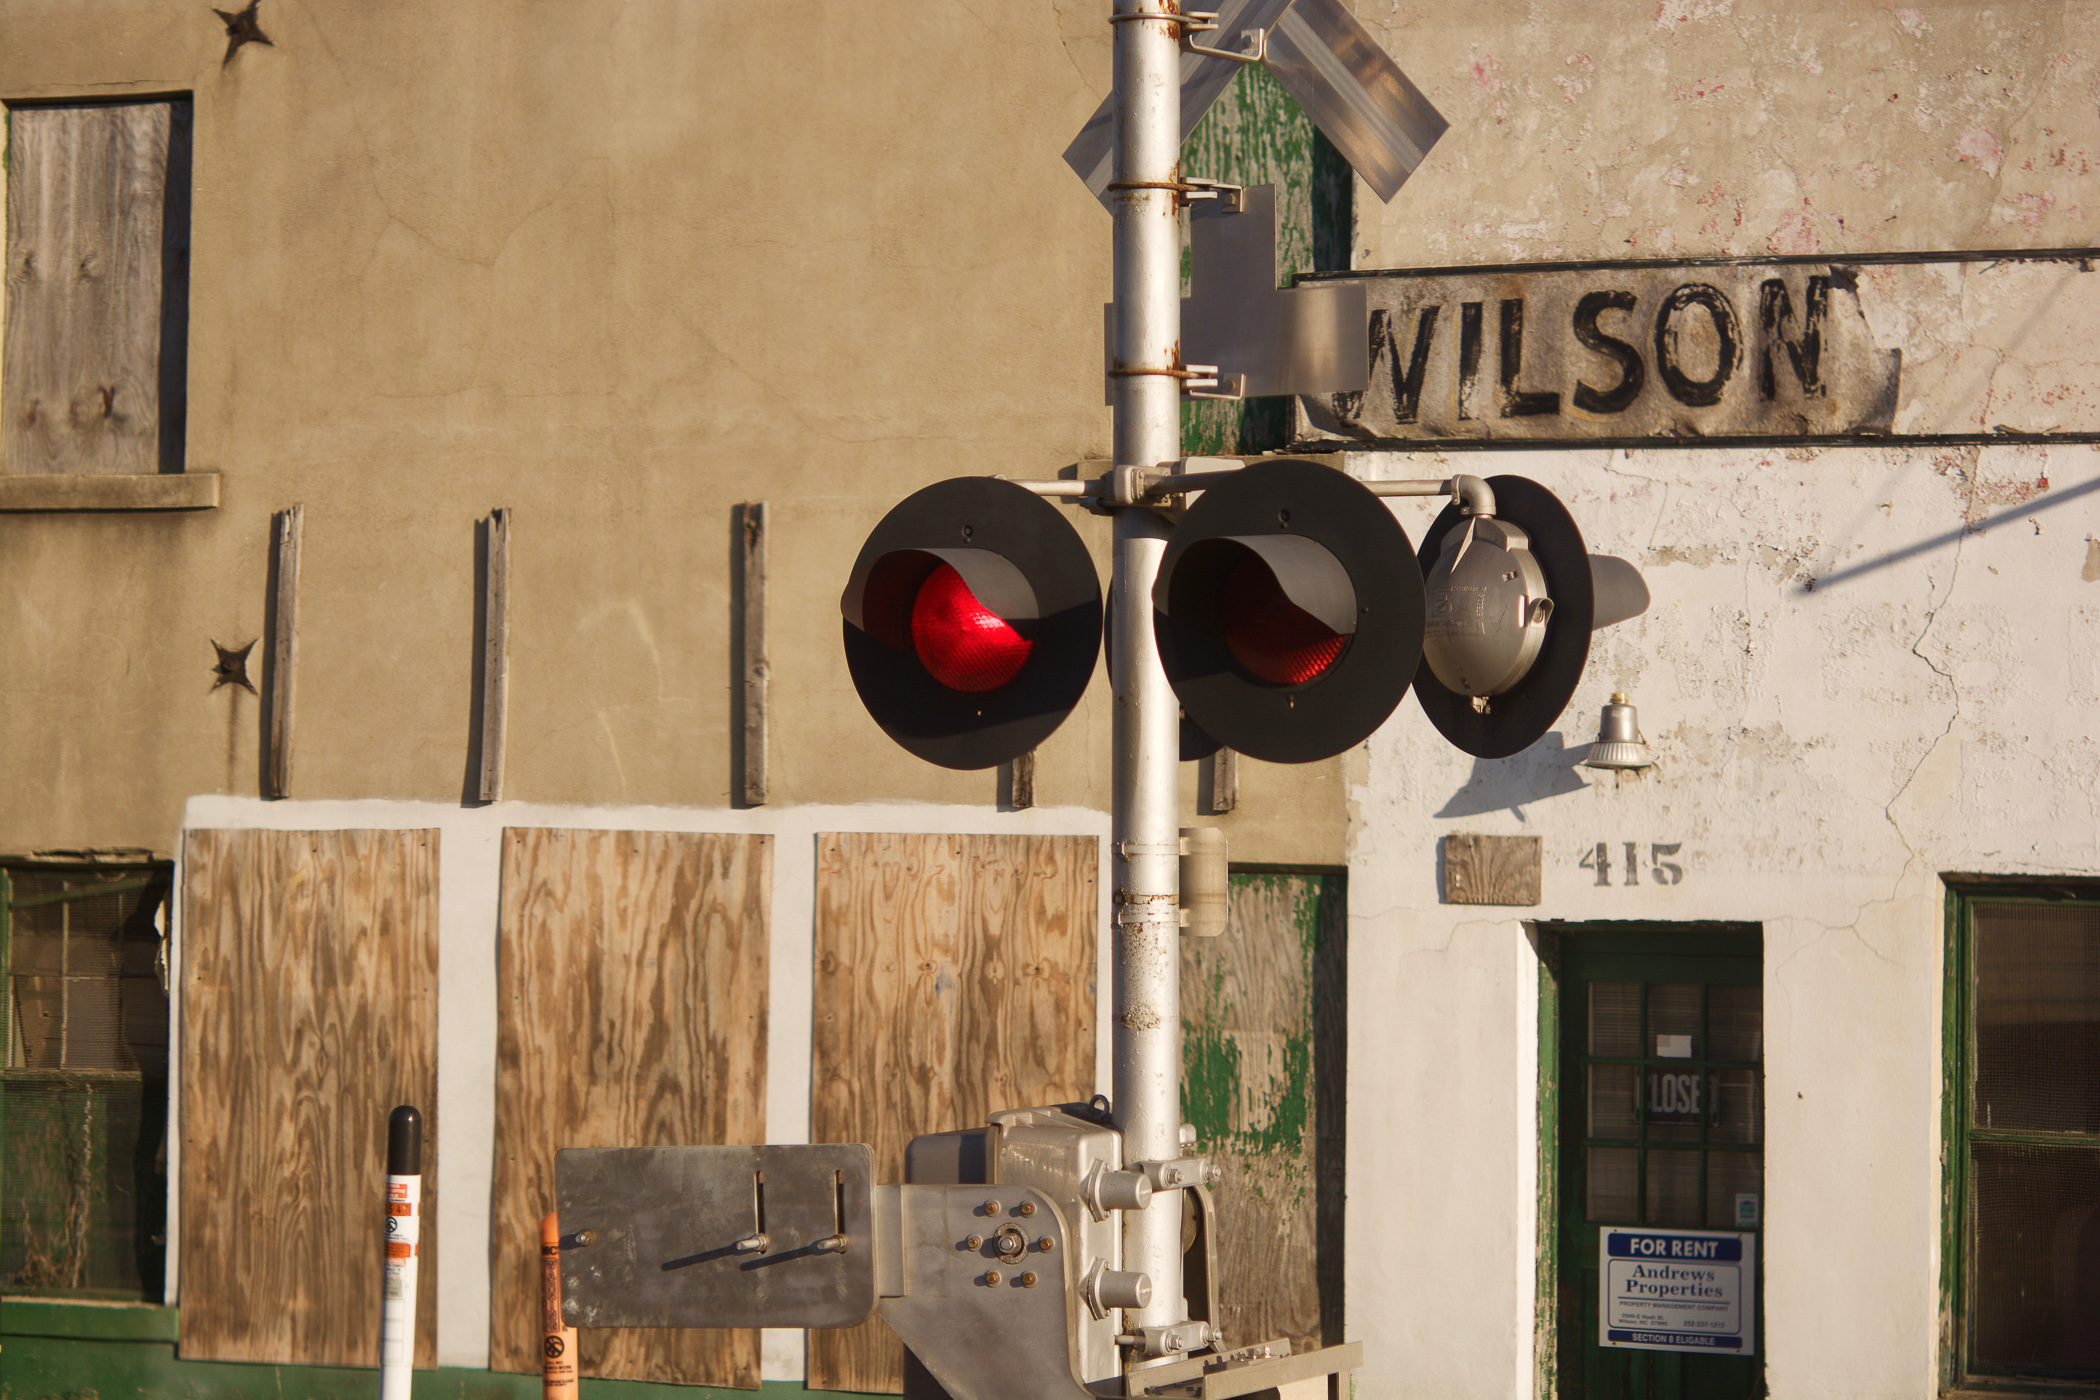  Signal lights from Northbound train approaching Wilson, NC, station. 